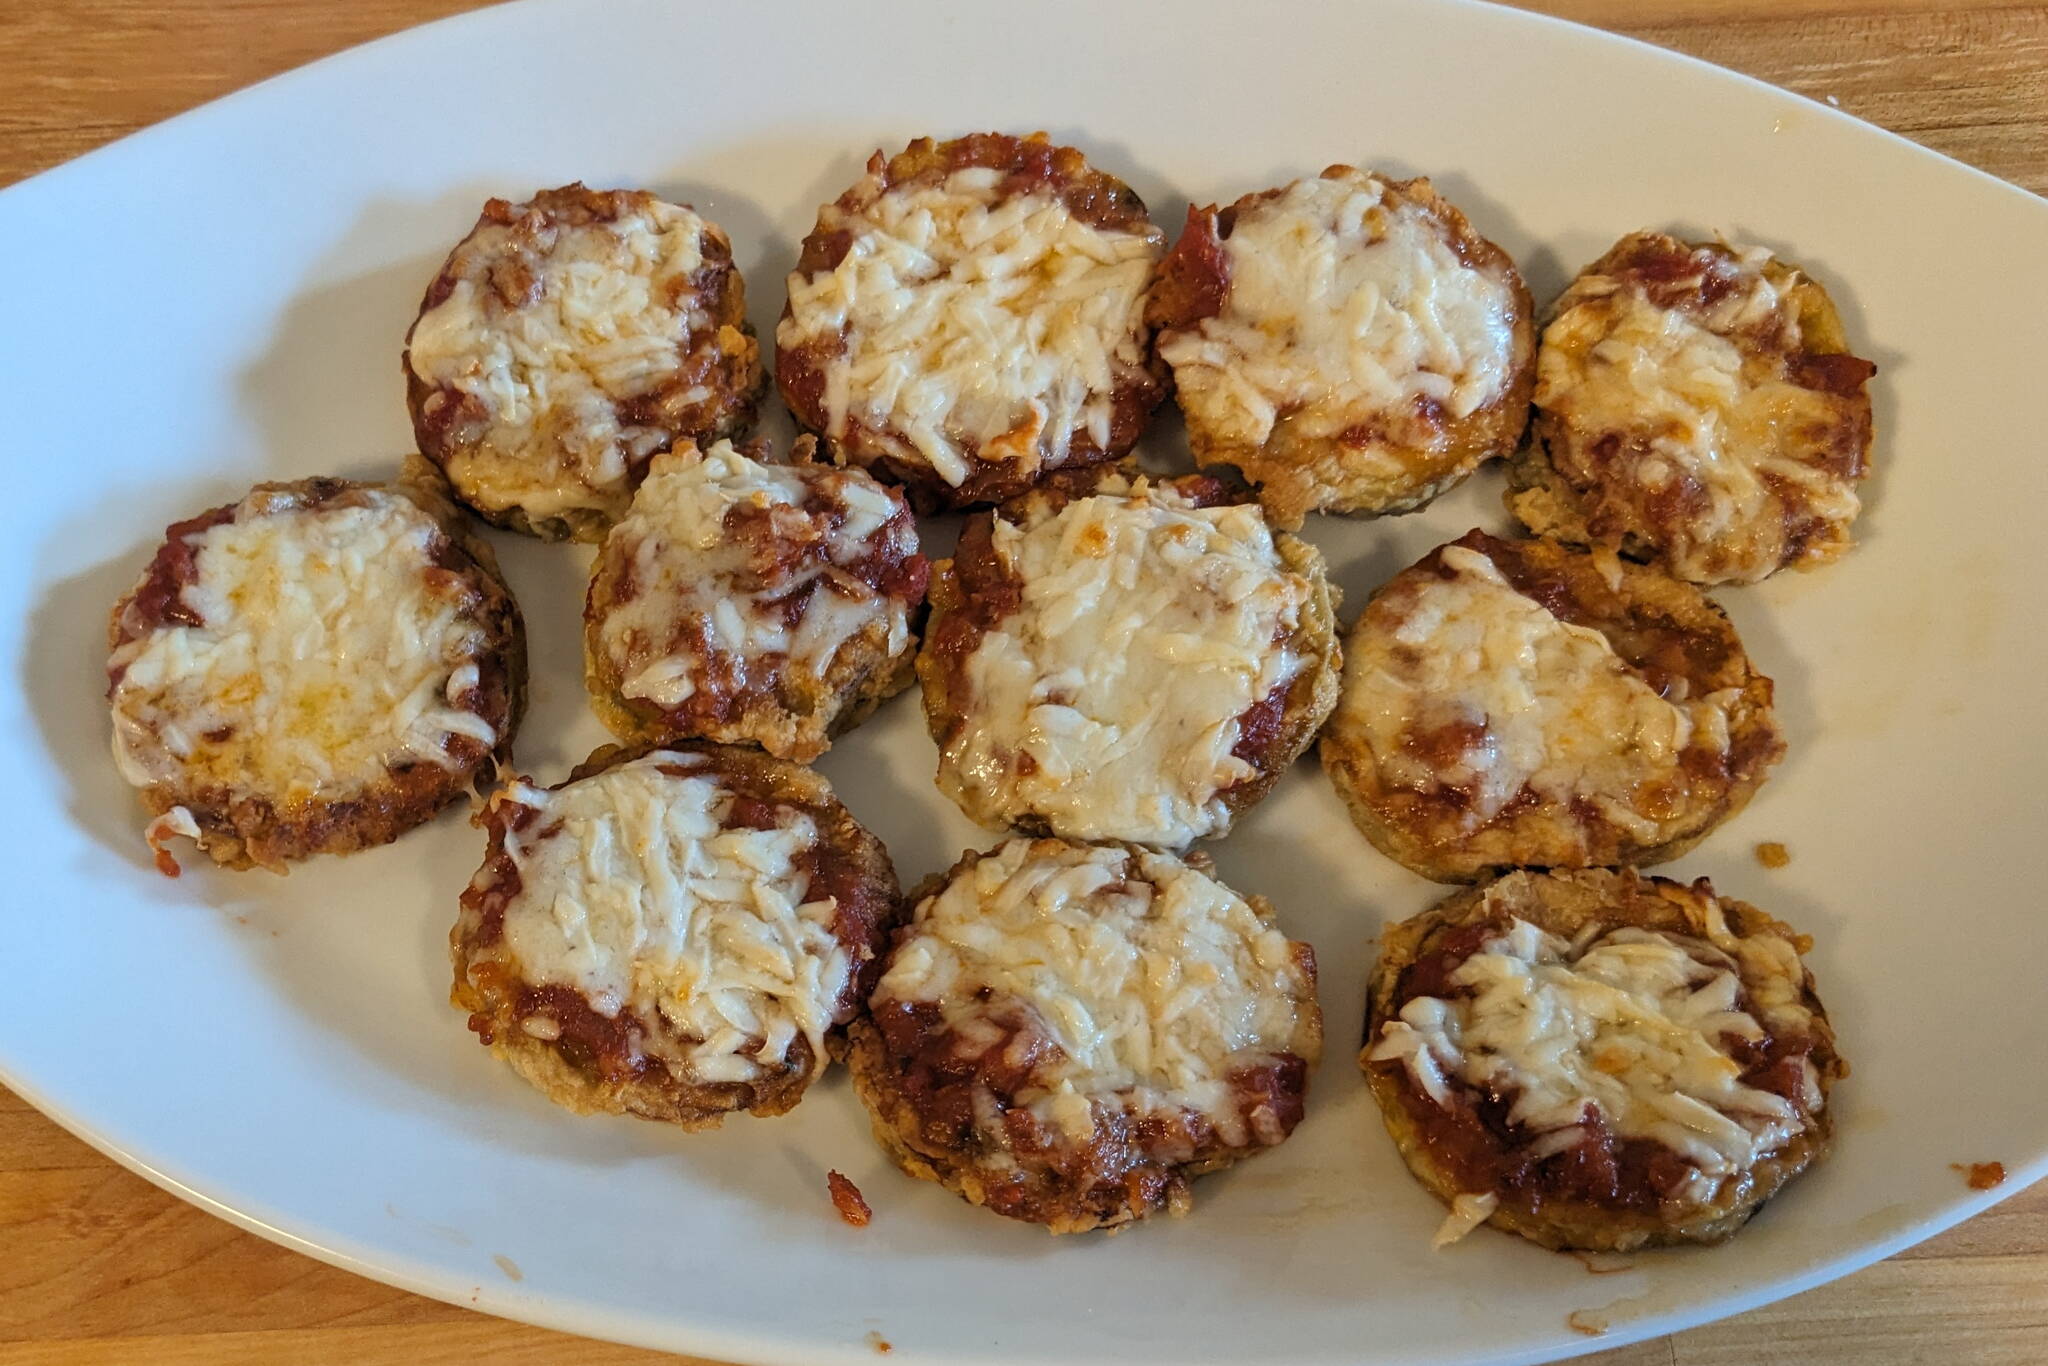 Individual eggplant parmesan rounds ready to serve. (Photo by Patty Schied)